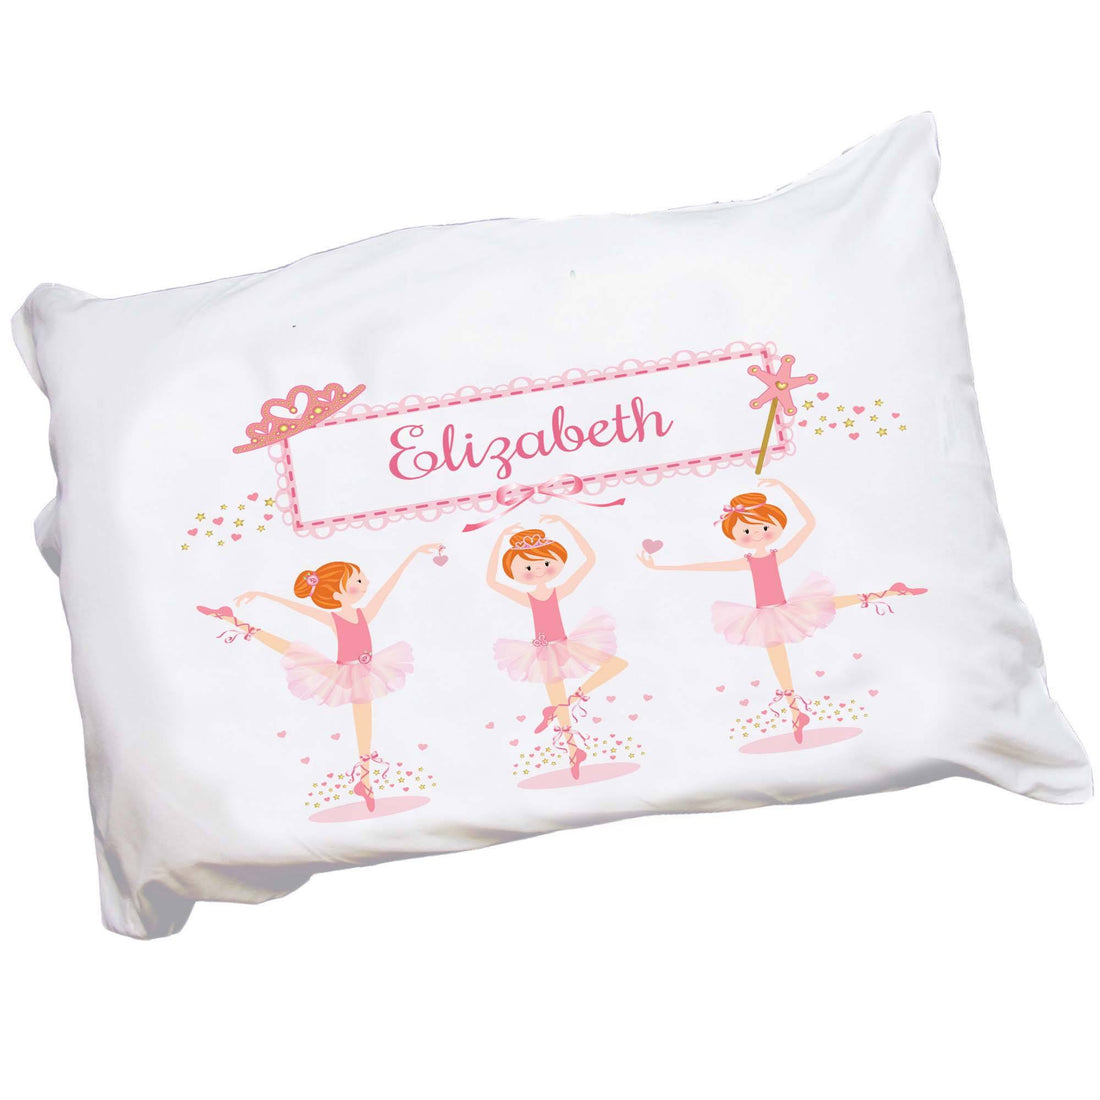 Personalized Childrens Pillowcase with Ballerina Red Hair design